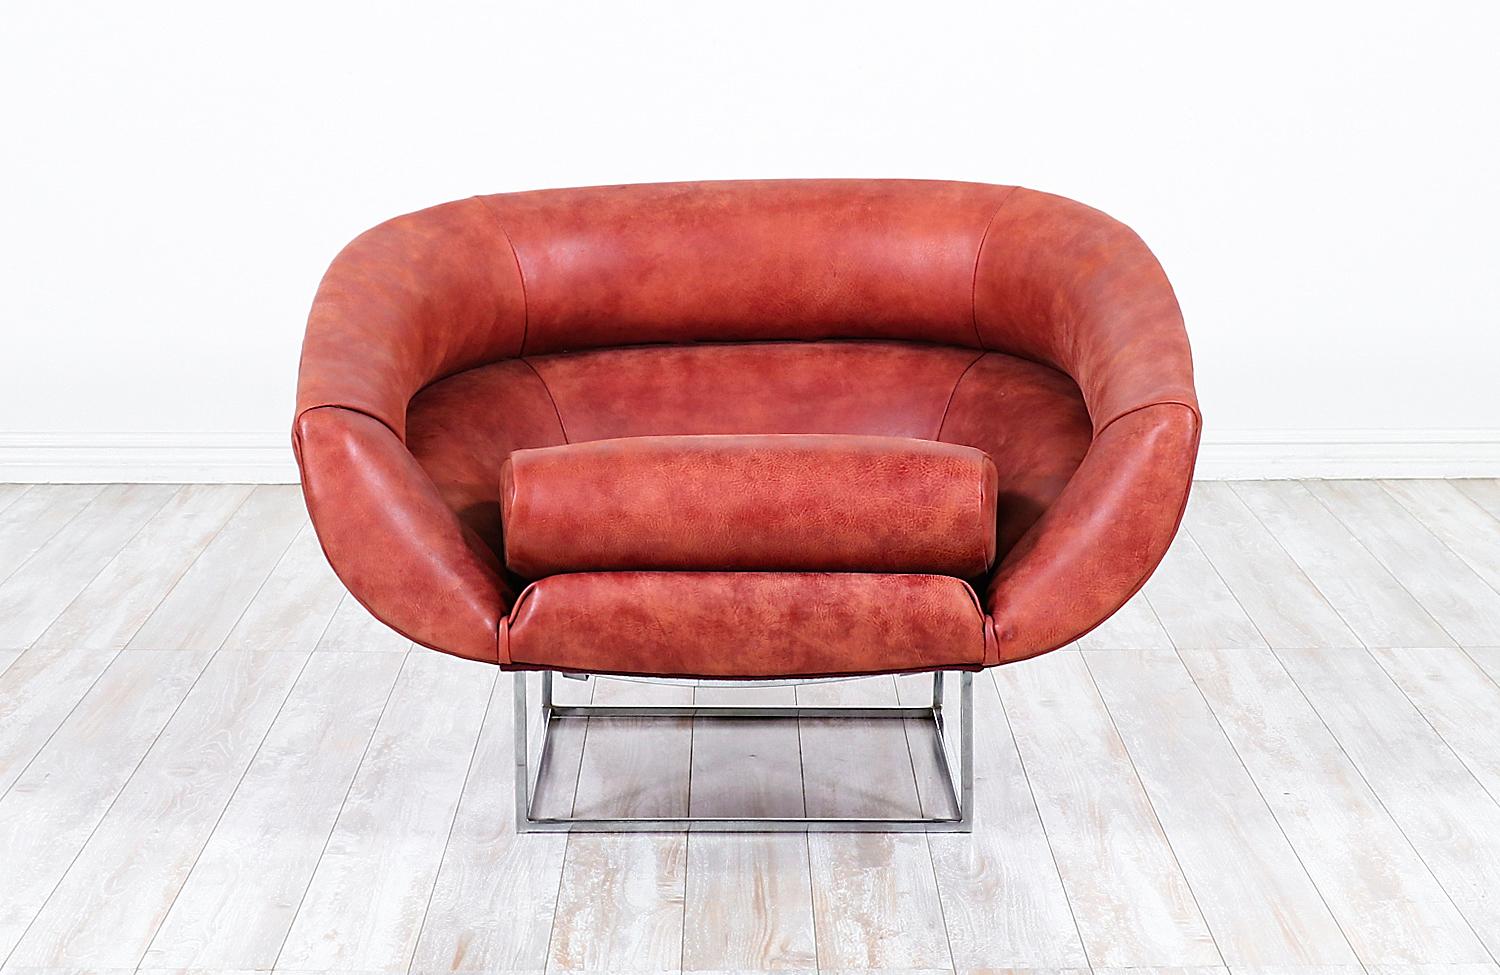 Mid-Century Modern tub chair designed by Milo Baughman for Thayer Coggin in the United States, circa 1970s. This comfortable, unique design features a reupholstered leather seat in a distressed red tone that contrasts nicely with the polished